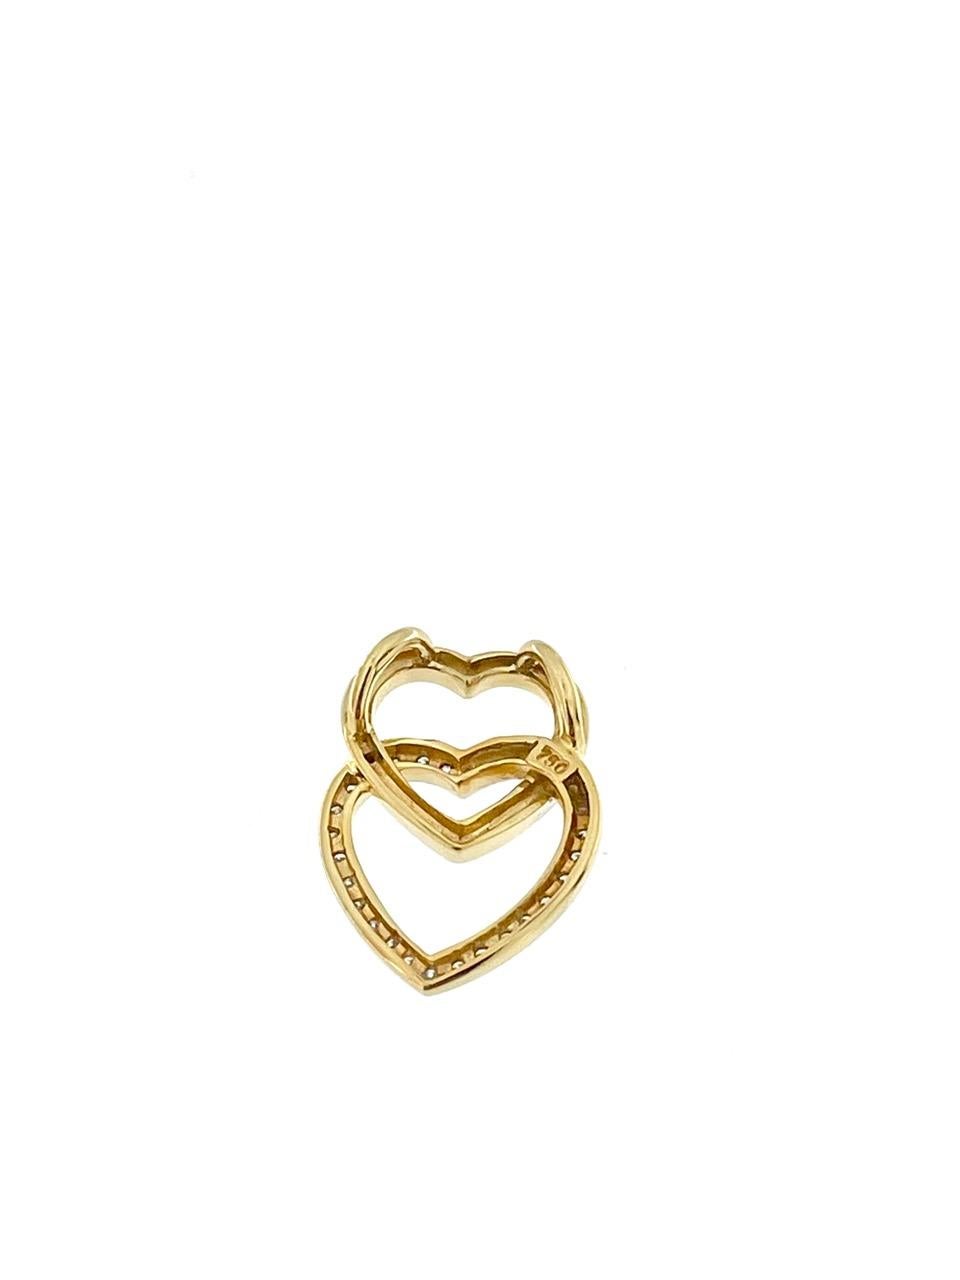 Modern Double Heart Pendant with Chain Yellow and White Gold with Diamonds For Sale